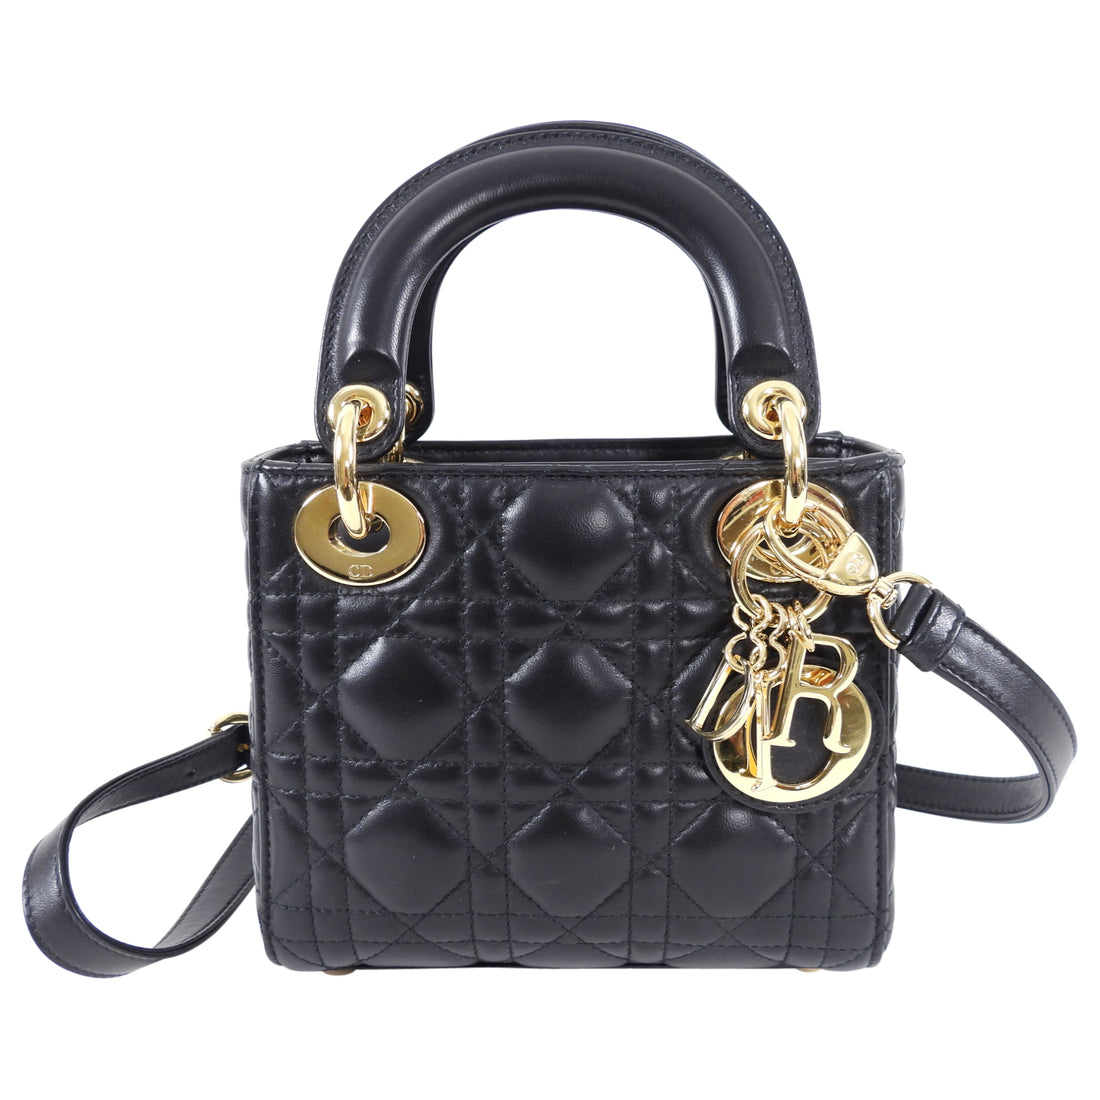 Lady Dior Black Medium Gold Hardware Made in Italy With long strap   dustbag   Canon EBags Prime